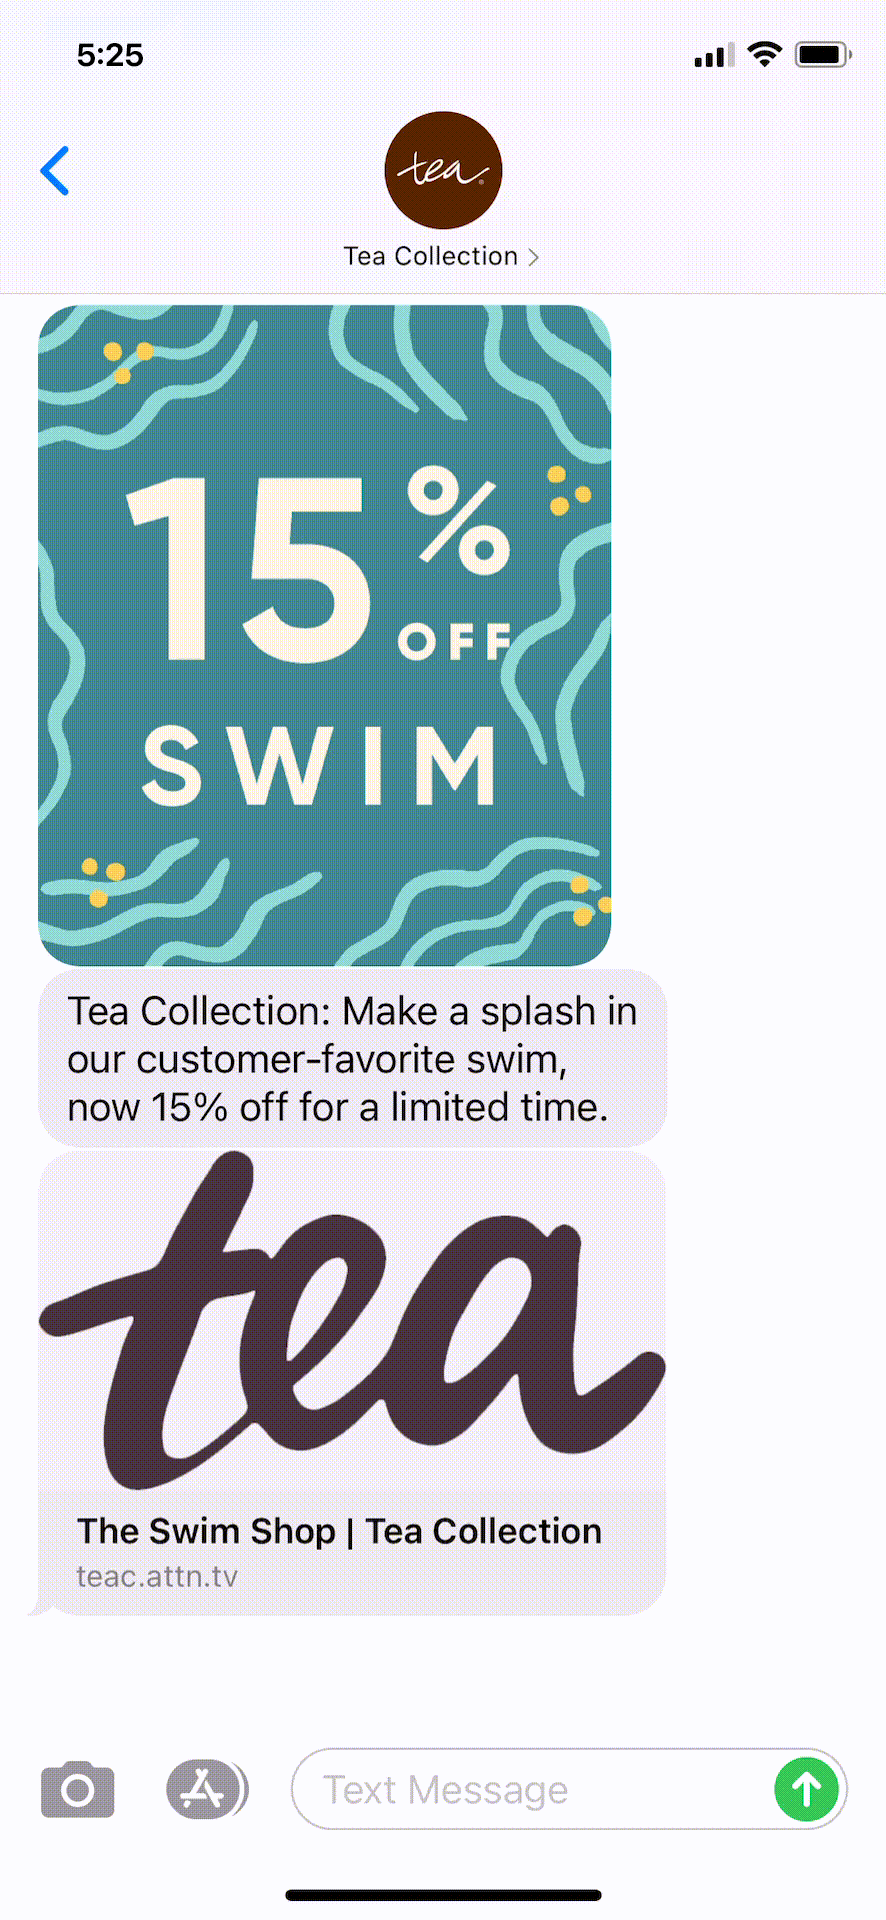 Tea-Collection-Text-Message-Marketing-Example-02.18.2021